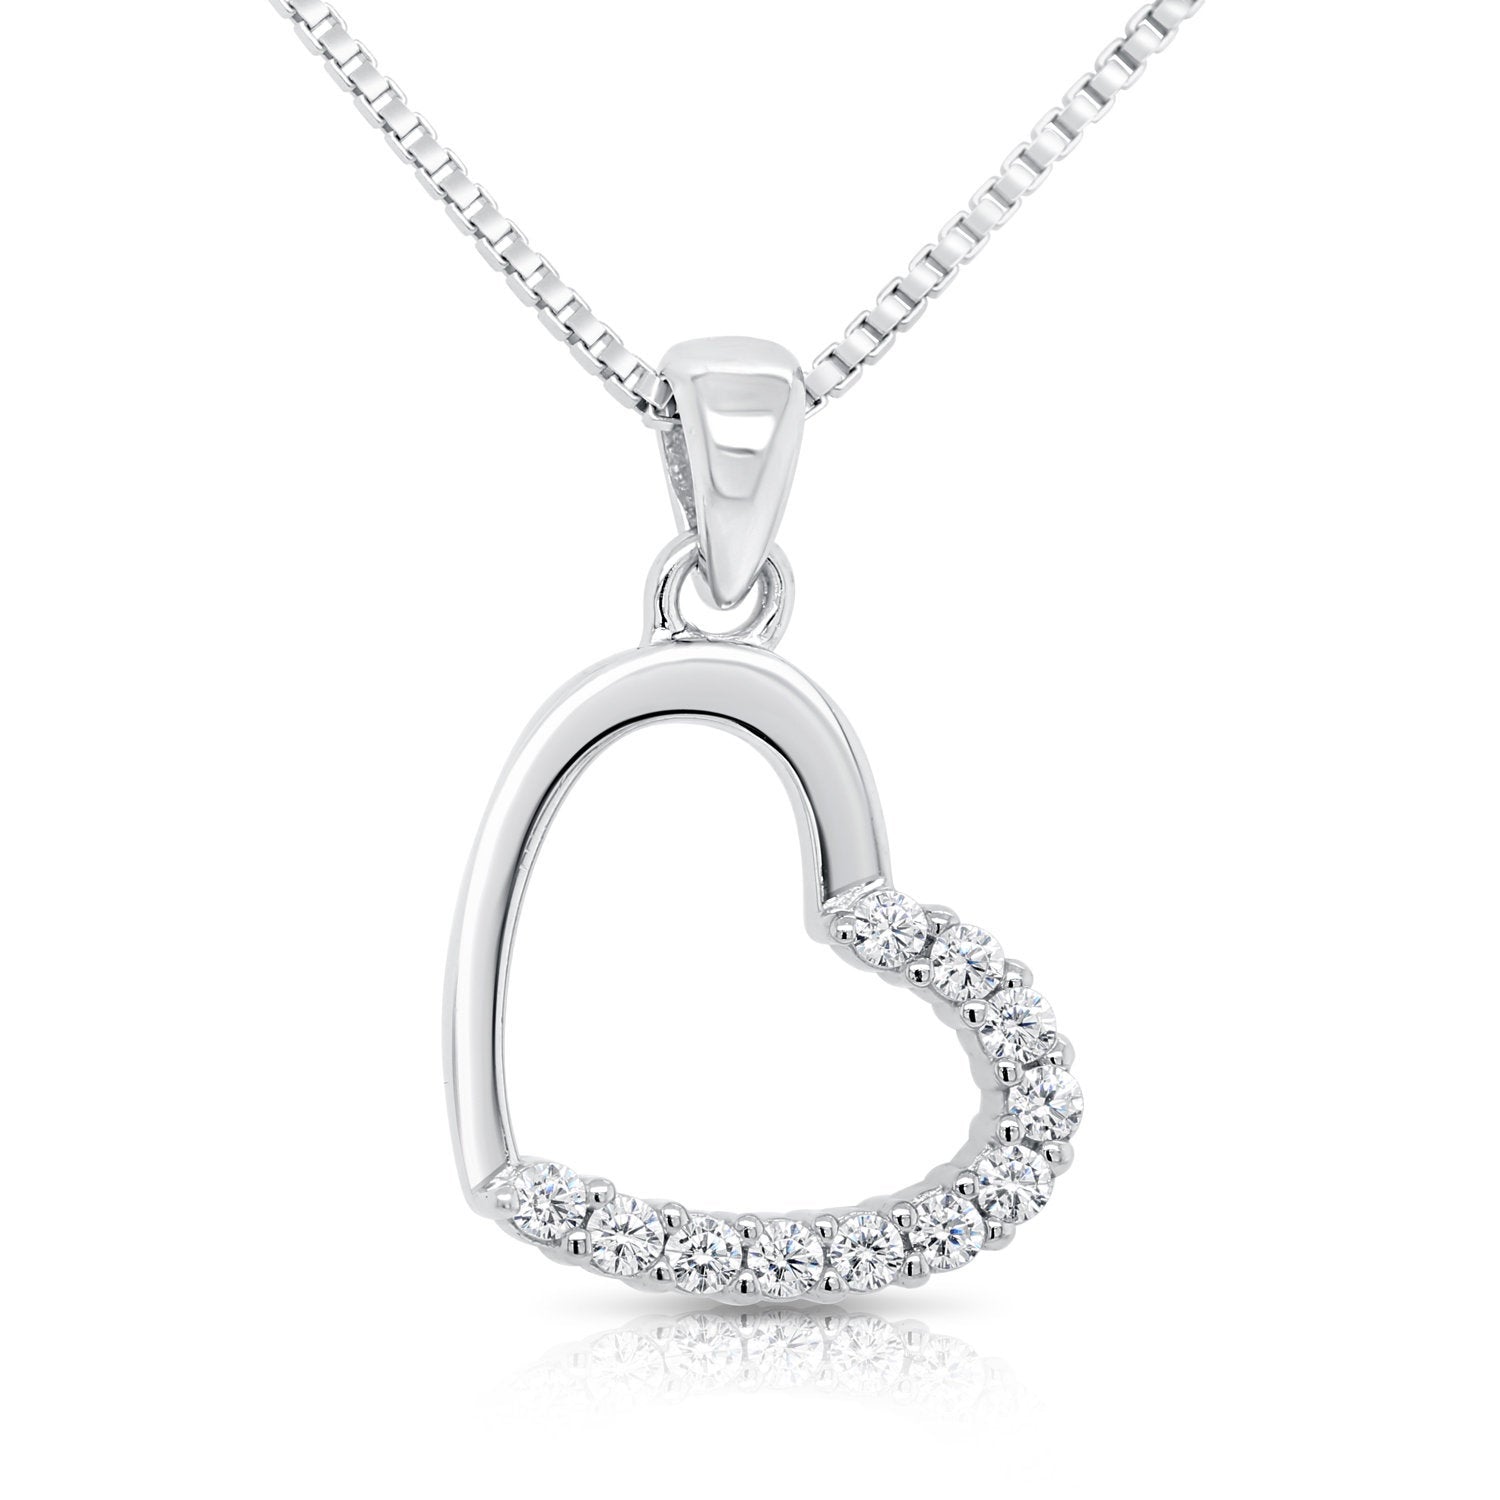 Sterling Silver Tilted Heart Charm Necklace